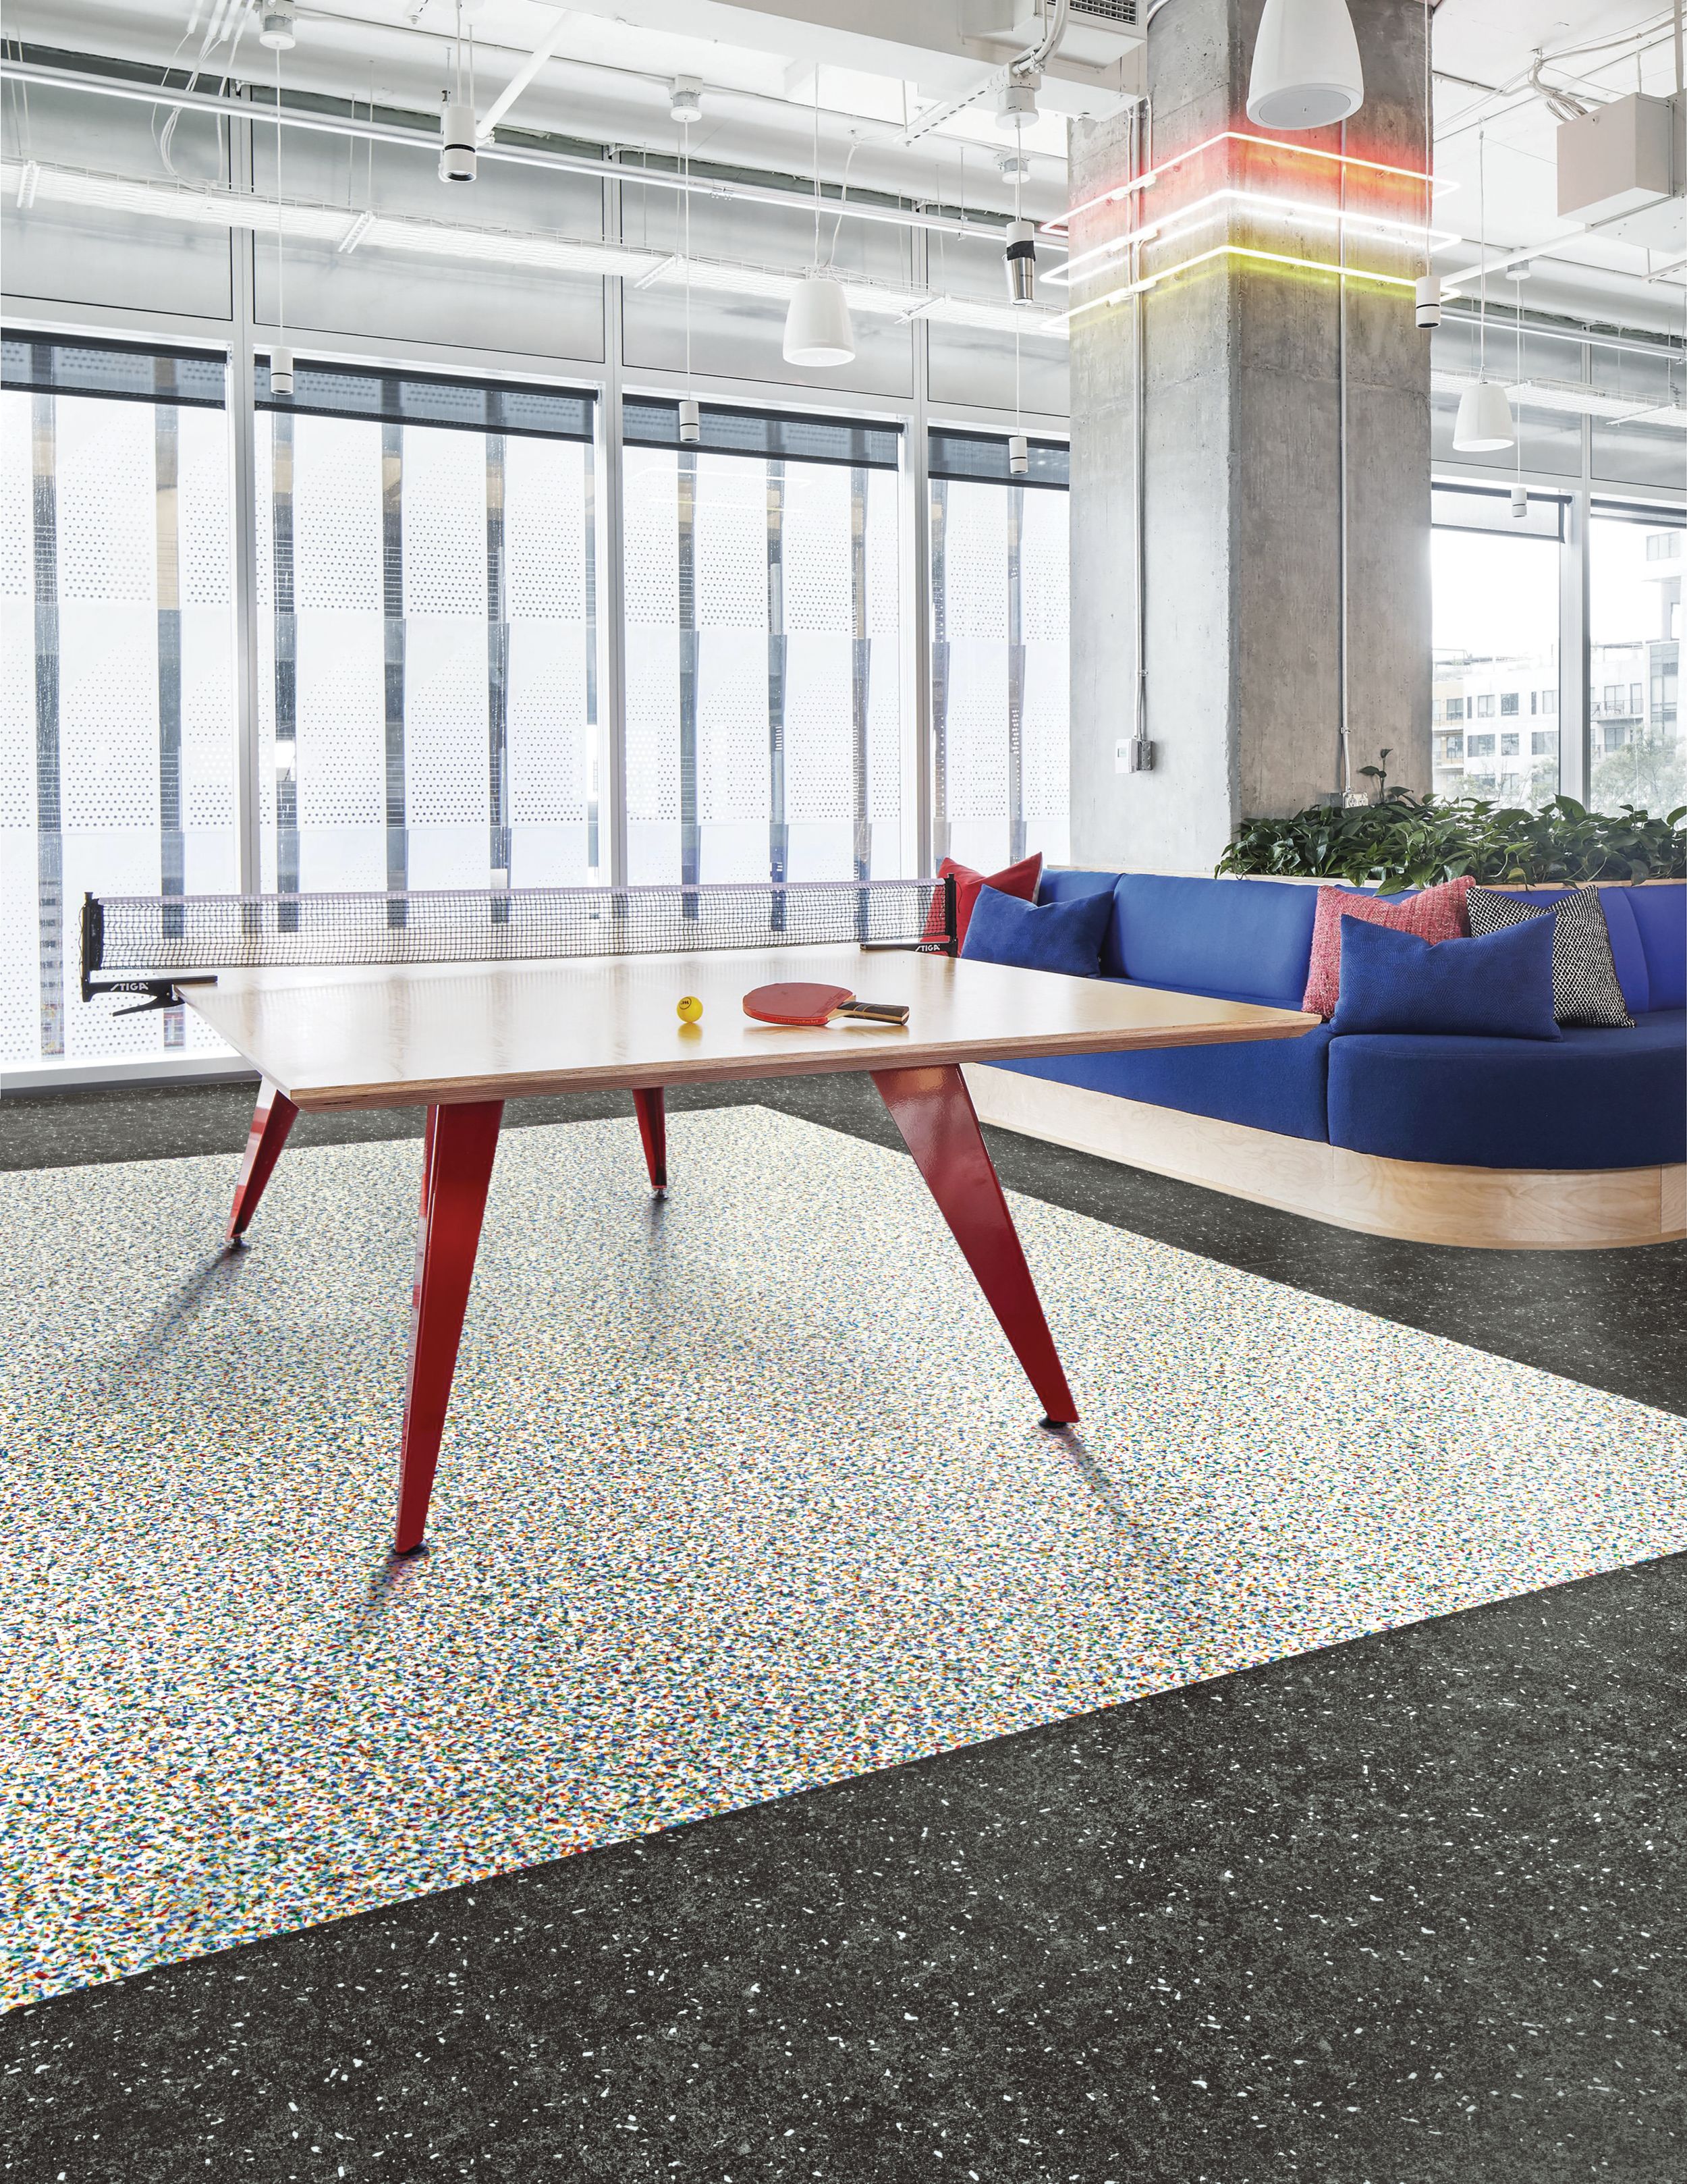 Interface Walk on By, Polychrome and Walk the Aisle LVT in a lobby space número de imagen 9